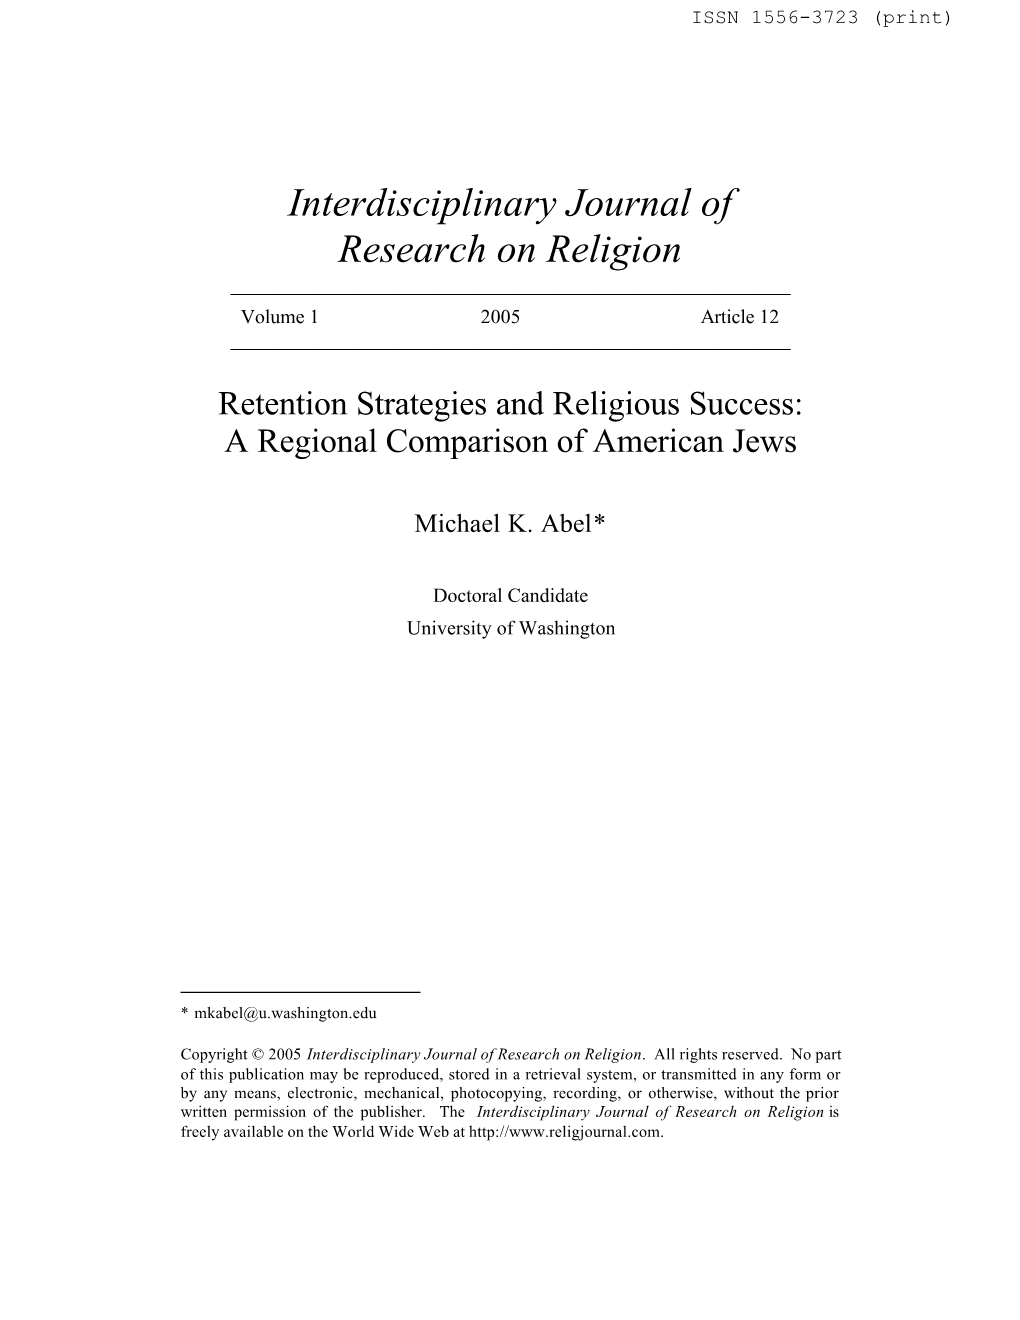 Interdisciplinary Journal of Research on Religion ______Volume 1 2005 Article 12 ______